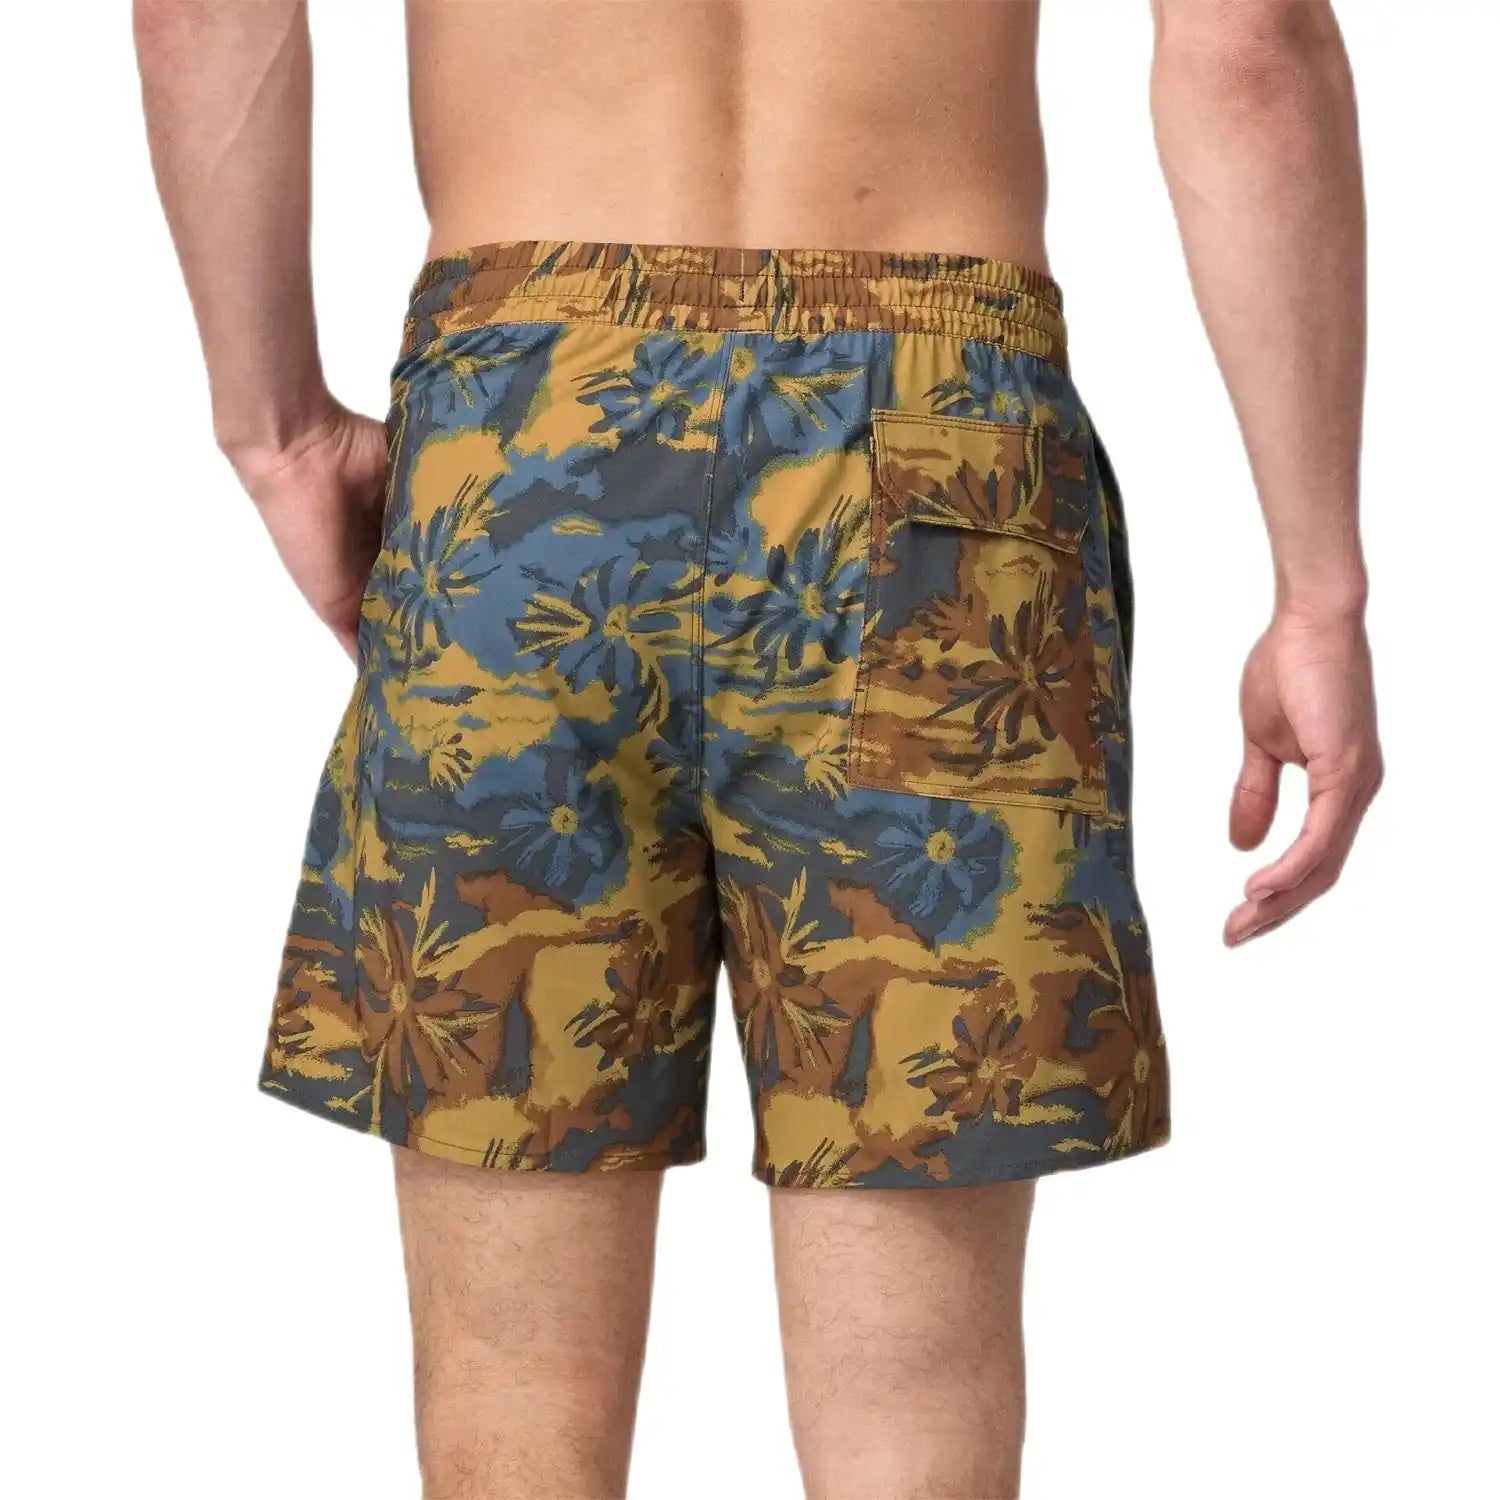 Patagonia M's Hydropeak Volley Shorts - 16", Cliffs Pufferfish Gold, back view model